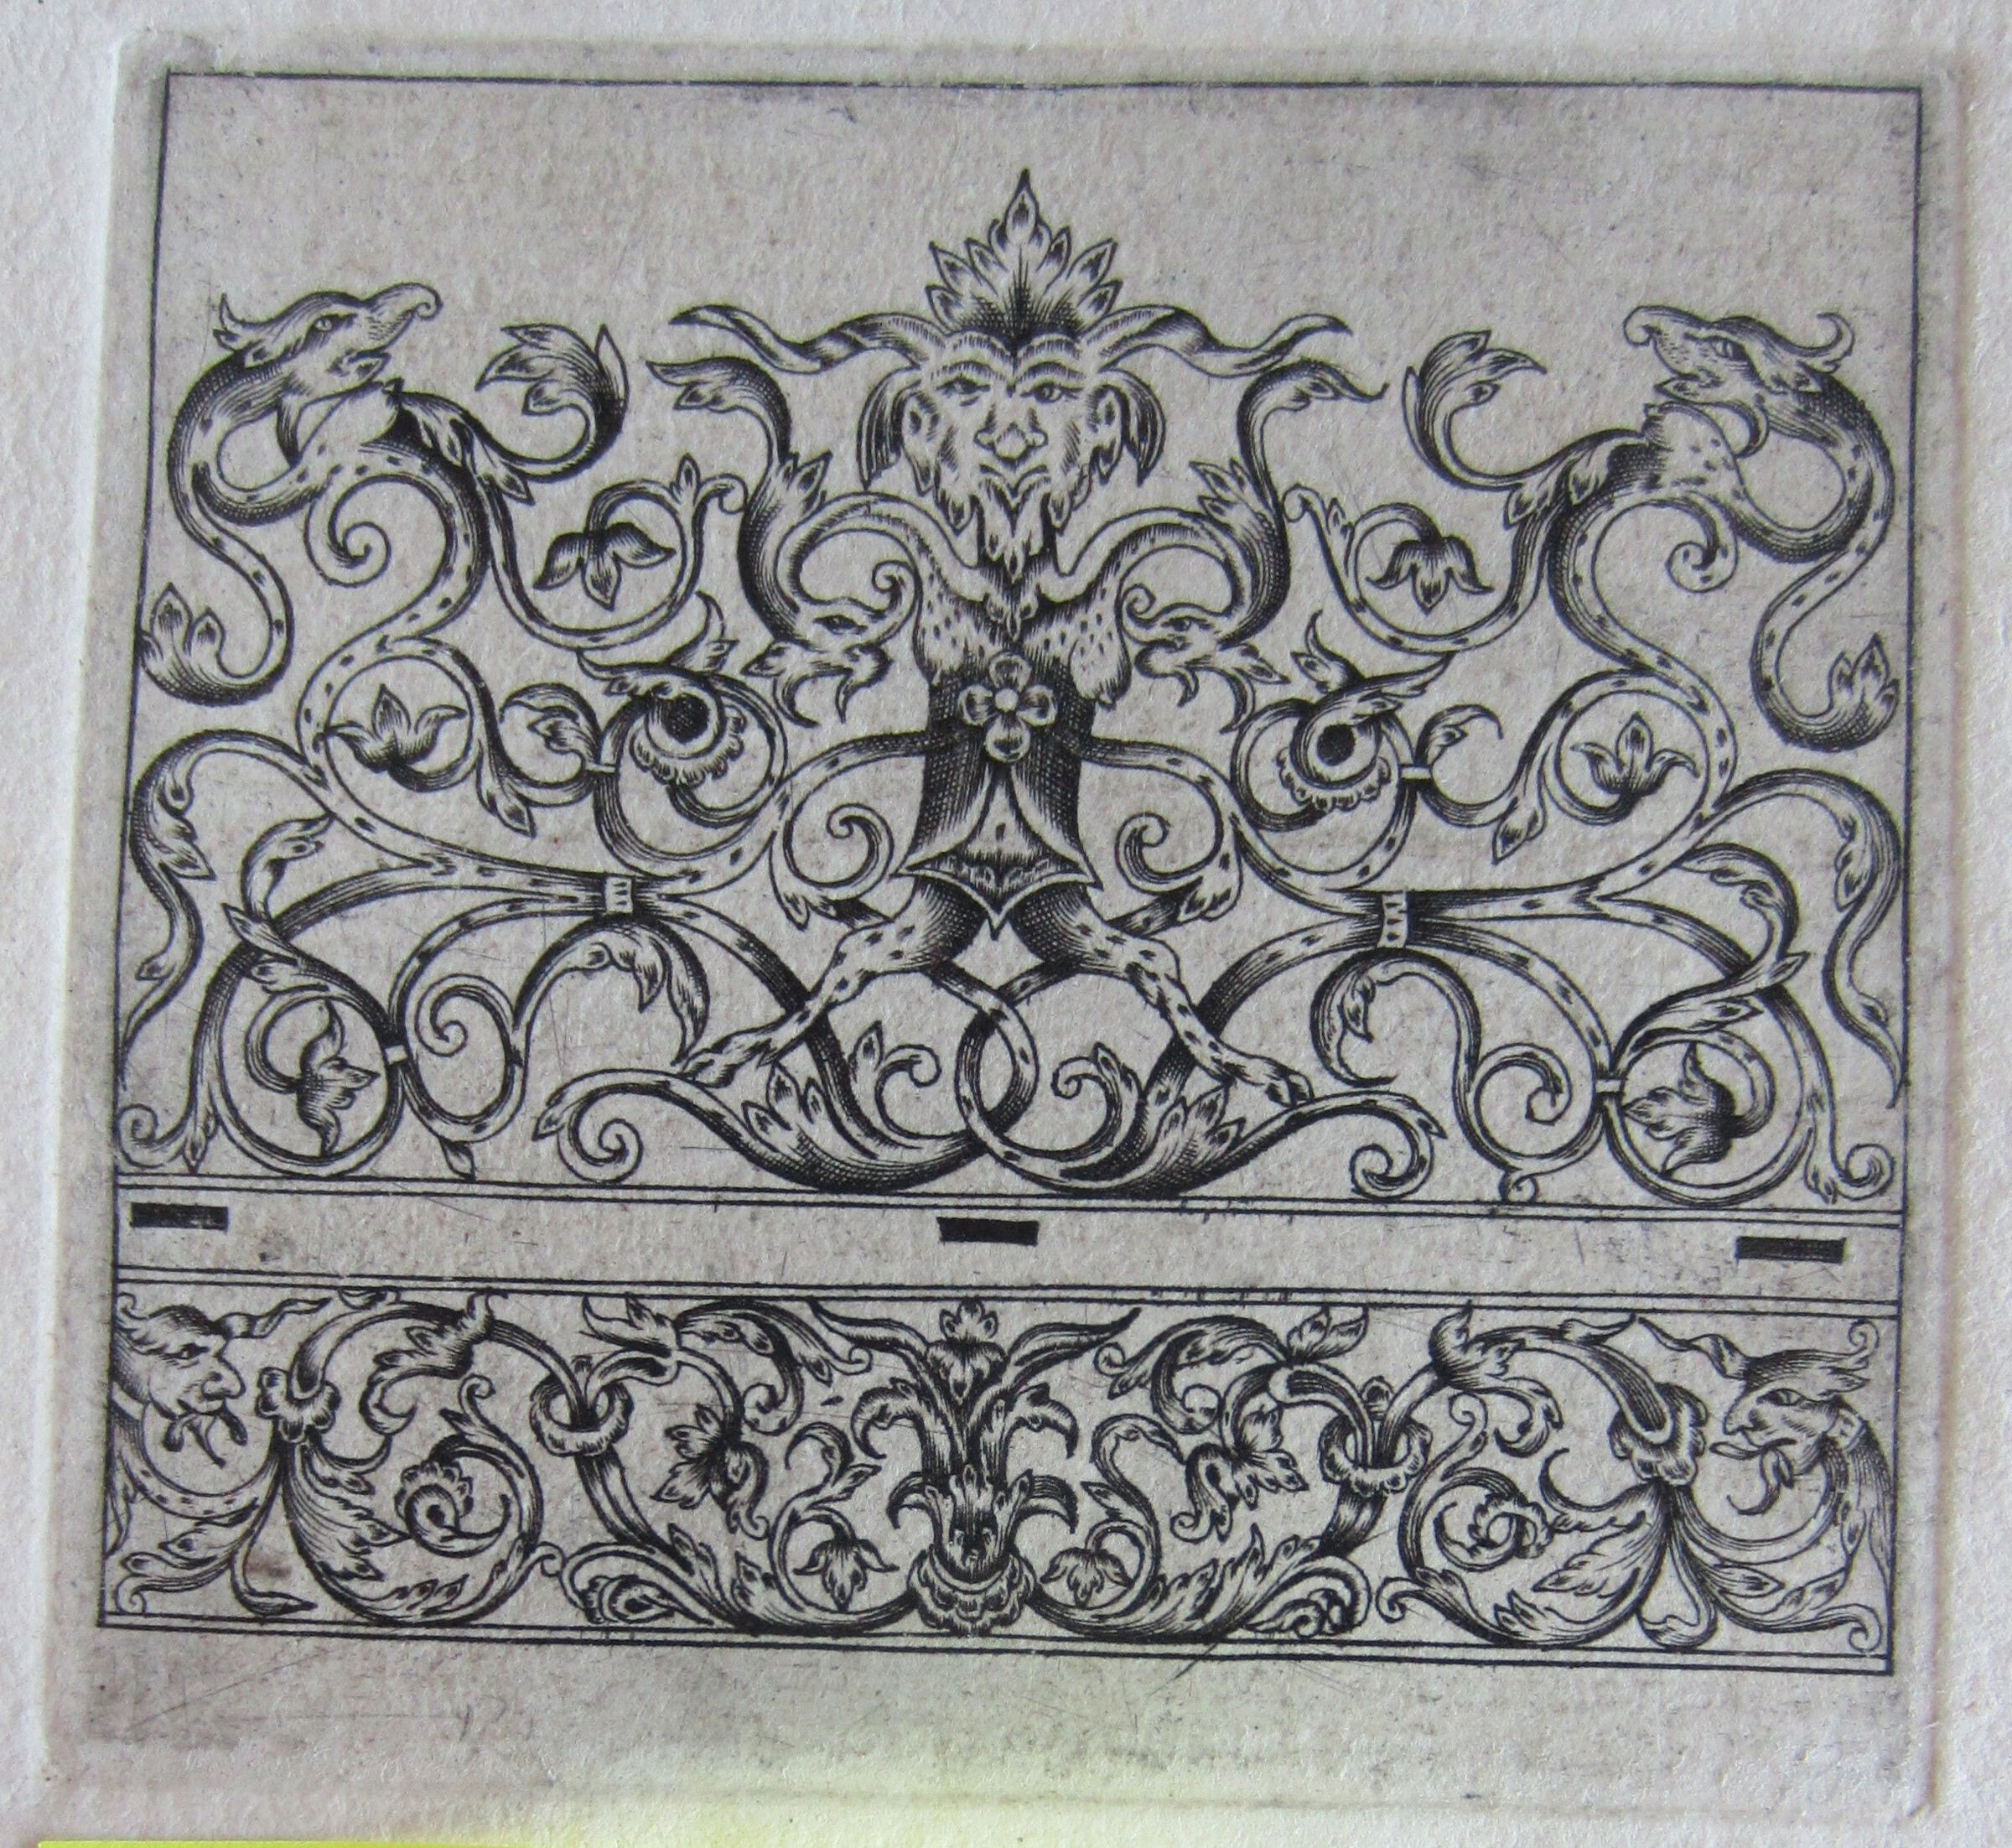 Foliate Ornament With A Satyr's Head, A Frieze Terminating In Satyrs' Heads Below